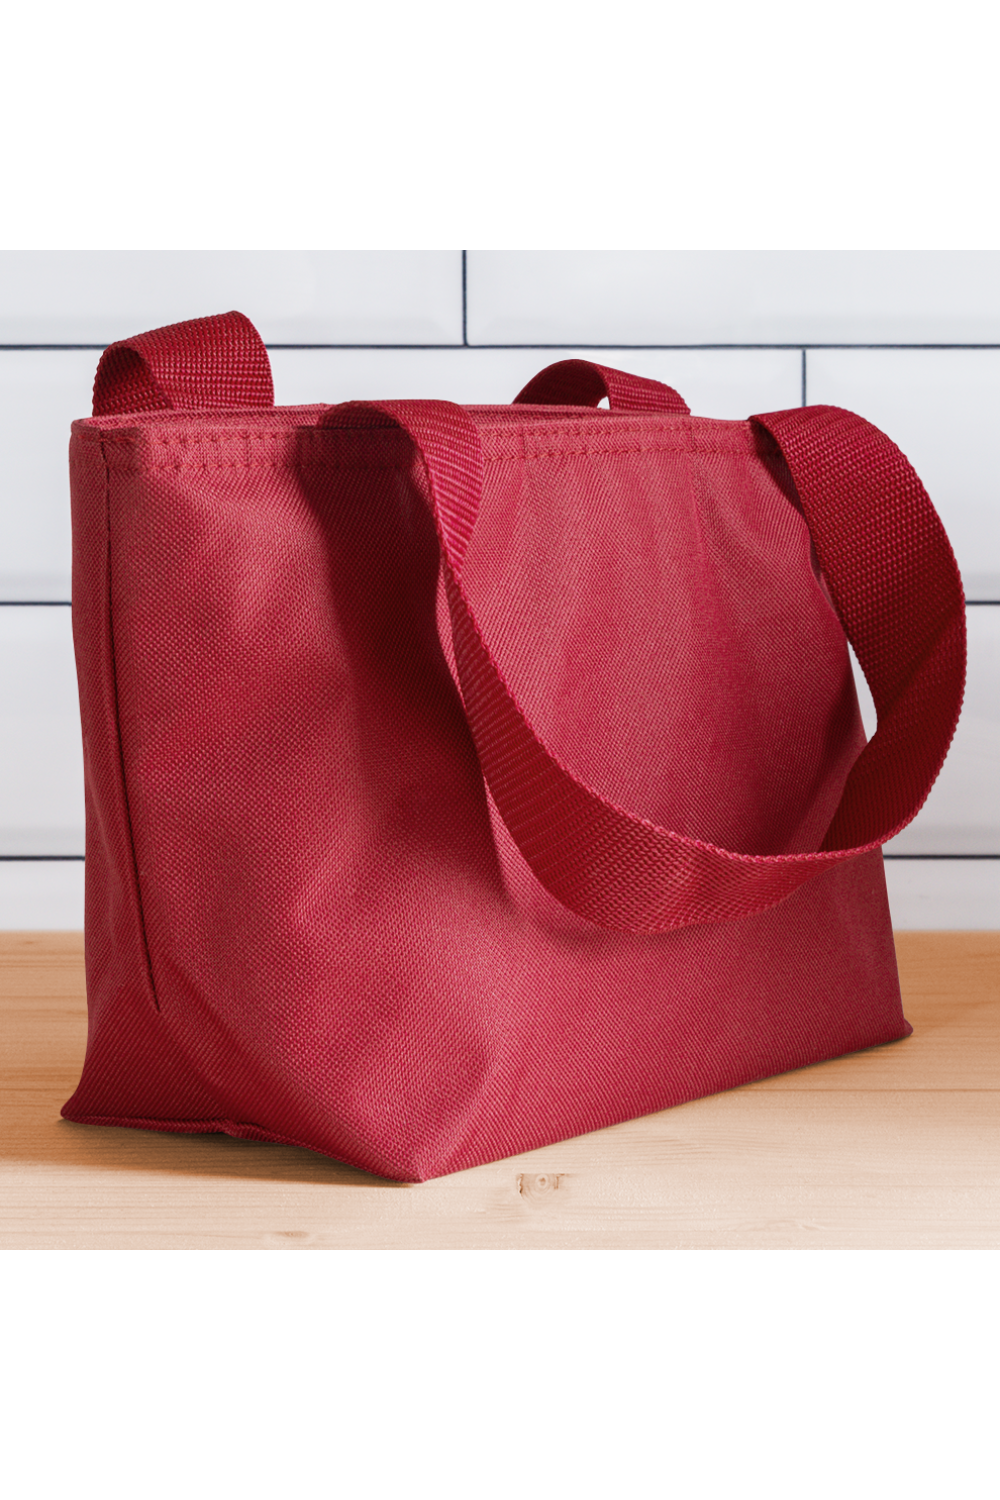 Women You Don't Need a King To Be a Queen Lunch Bag - red